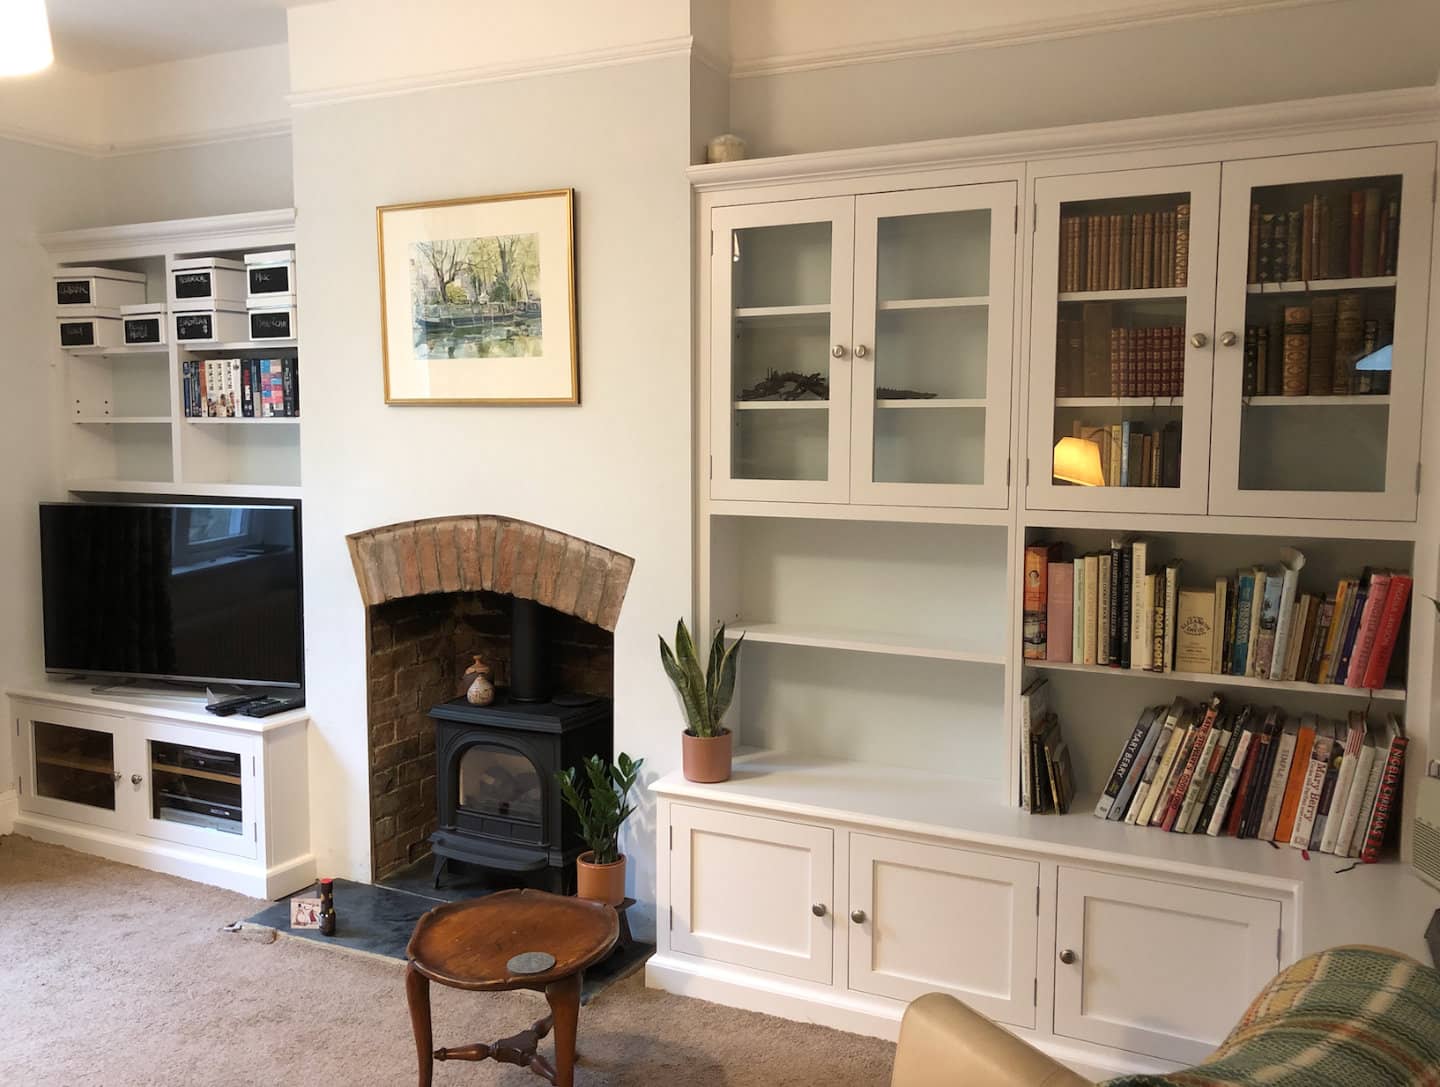 Two bespoke bookcases with an assortment of books and ornaments placed upon it.